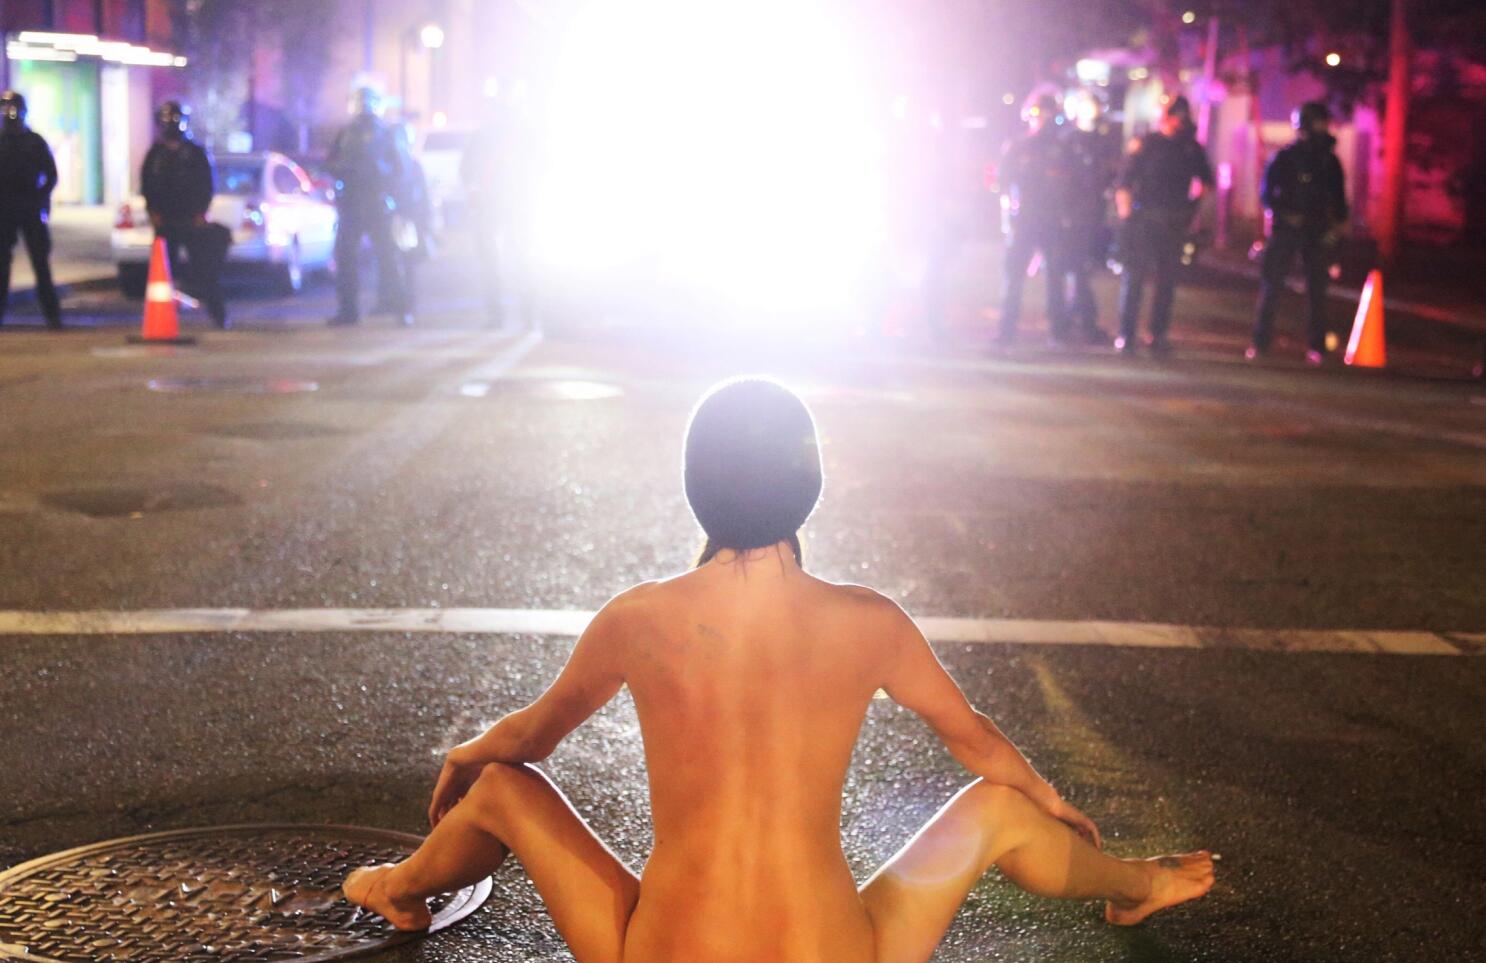 brooke plantenga recommends woman naked in street pic